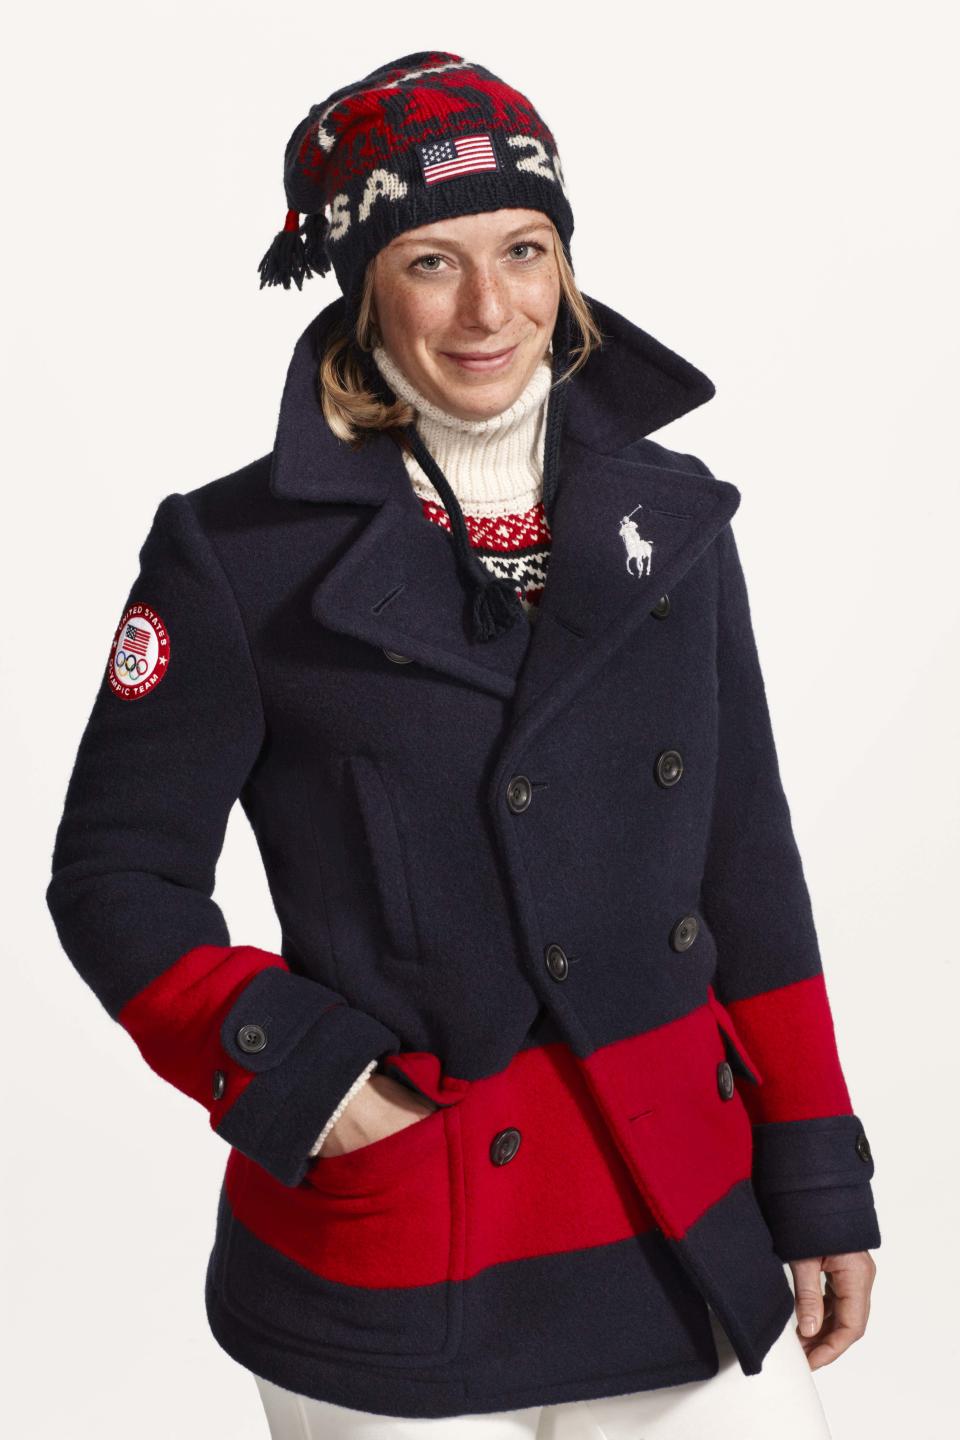 This undated product image provided by Ralph Lauren shows U.S. Olympic skier Hannah Kearney wearing fashion by designer Ralph Lauren for the 2014 Winter Olympics. Every article of clothing made by Ralph Lauren for the U.S. Olympic athletes in Sochi has been made by domestic craftsman and manufacturers. (AP Photo/Ralph Lauren)